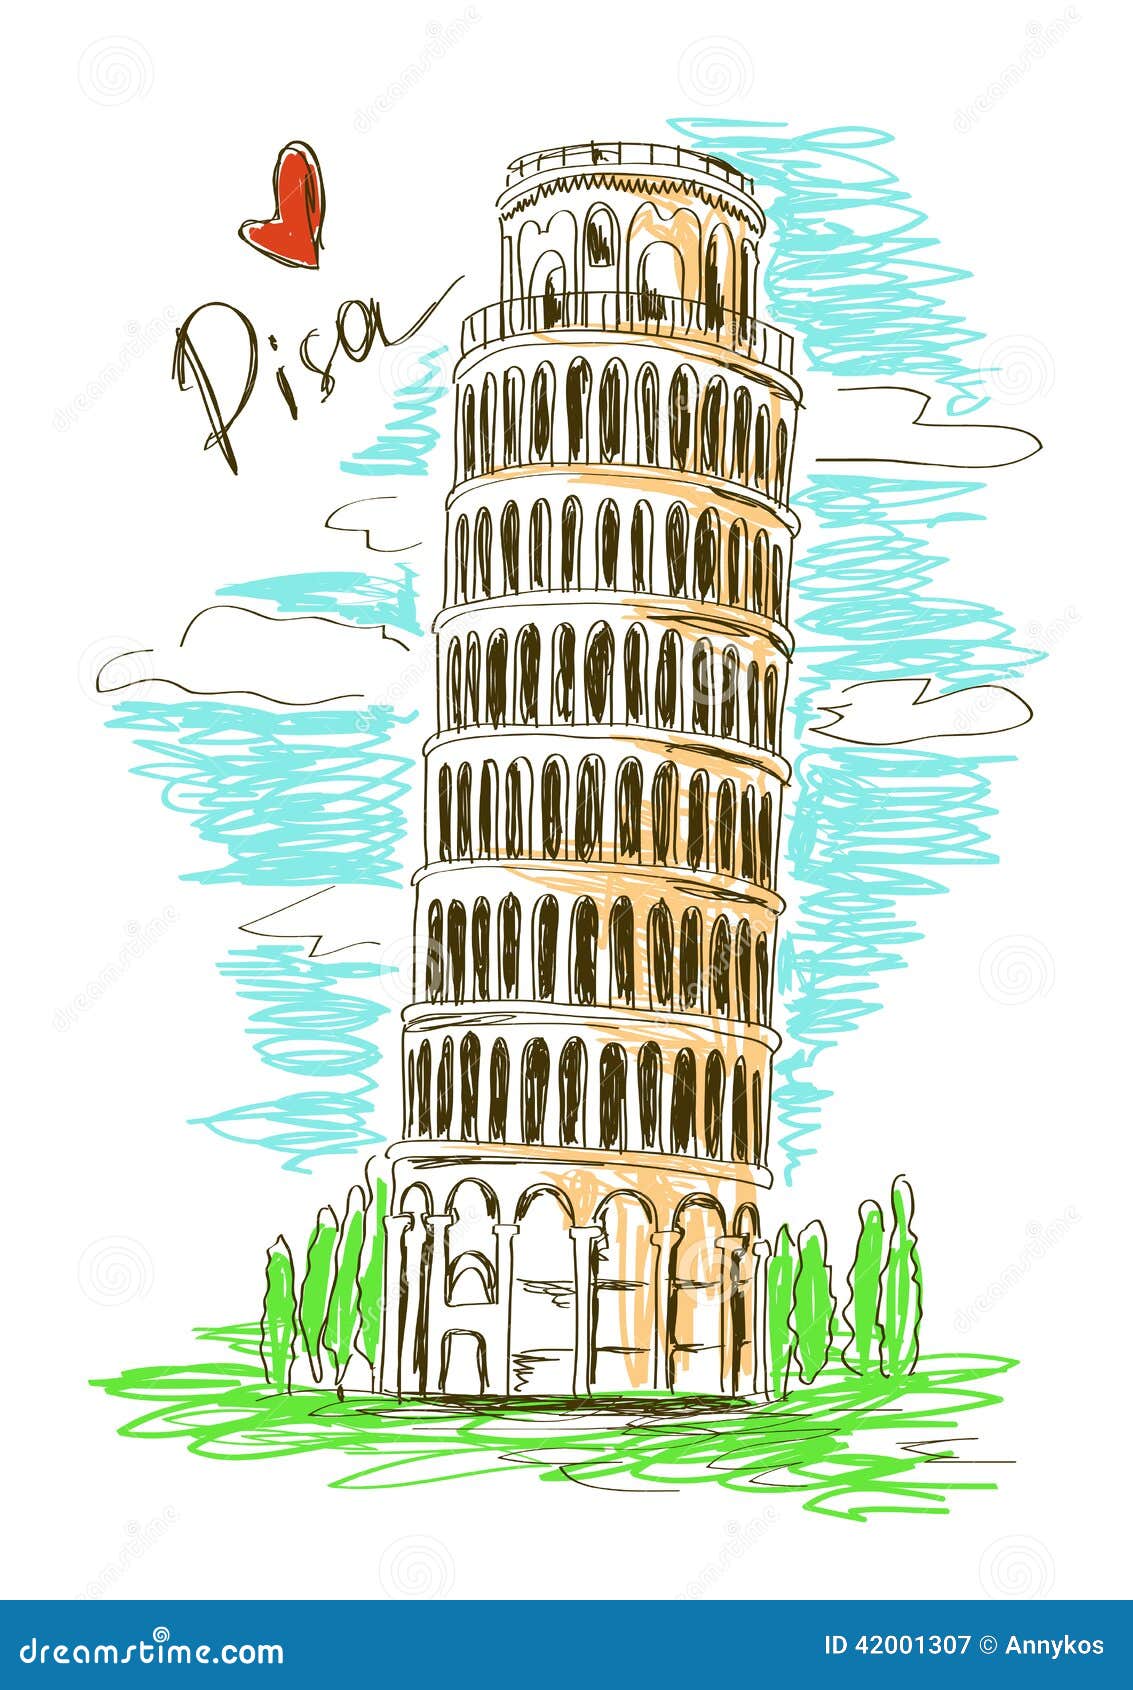 Blueprint for the Leaning Tower of Pisa | Warehouse 13 Artifact Database  Wiki | Fandom